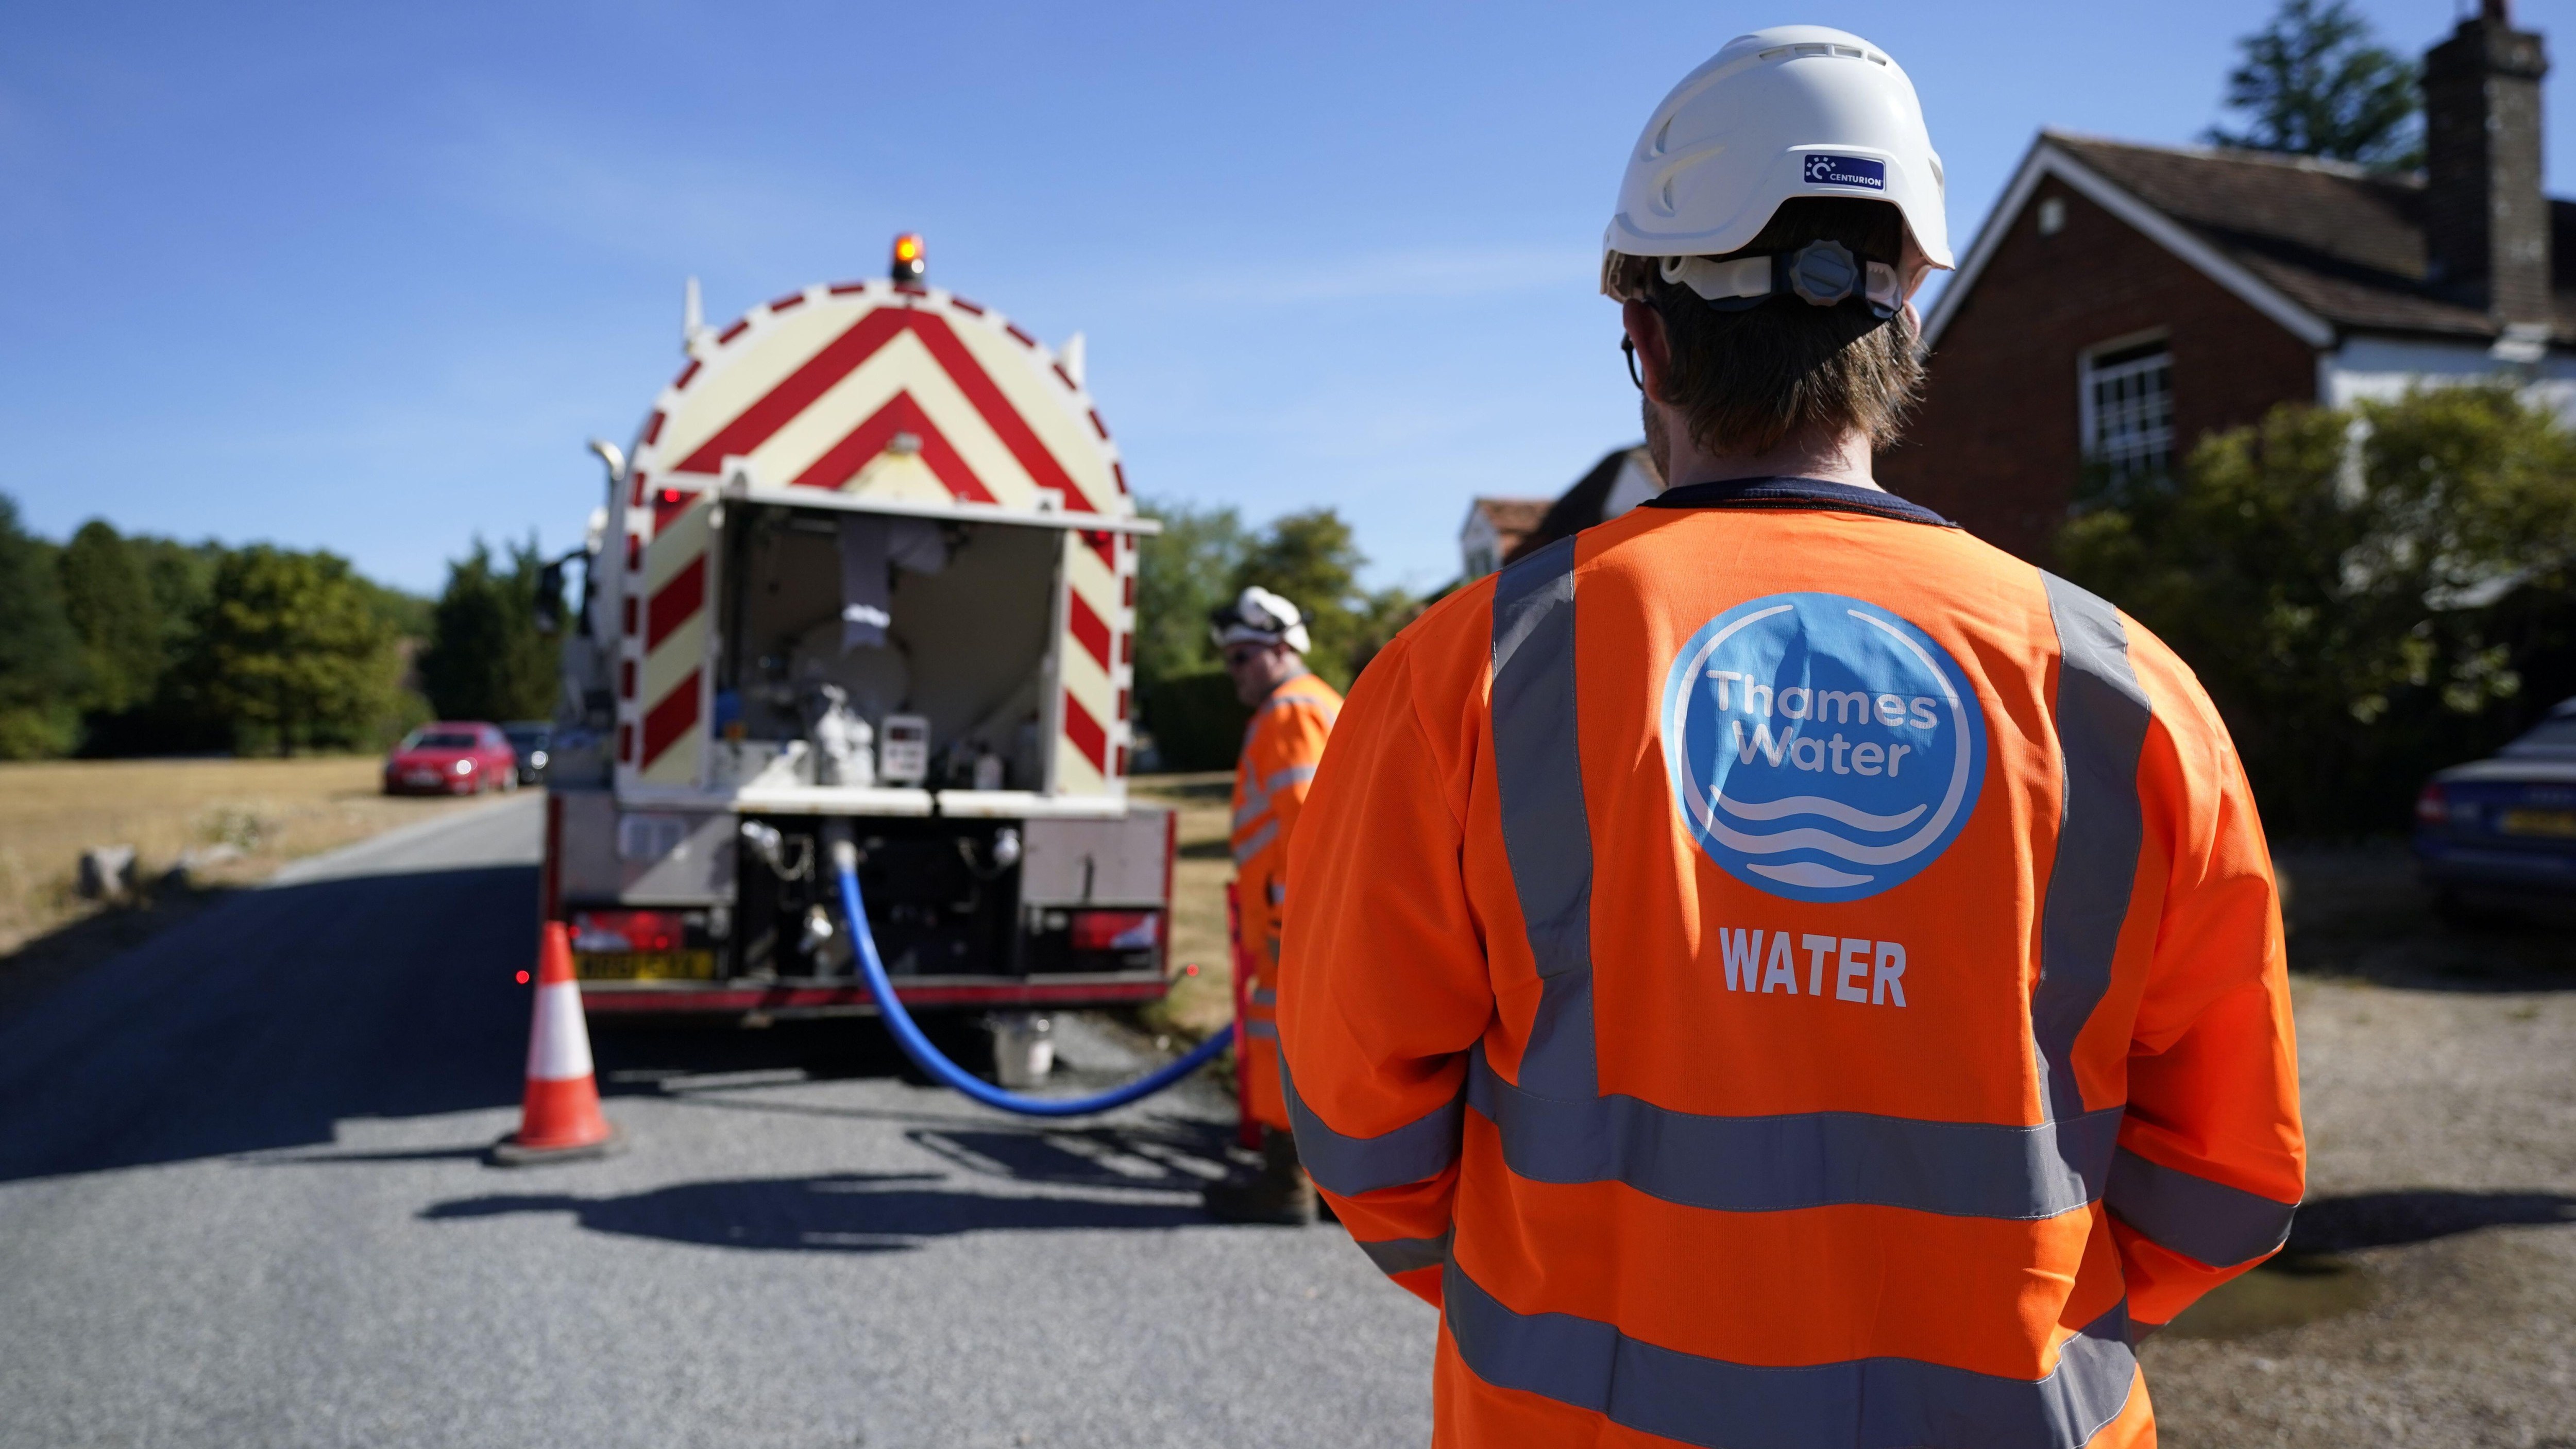 Thames Water is demanding a 56 per cent rise in household bills so that it can catch up on remedial work to prevent pollution incidents and repair leaking pipes